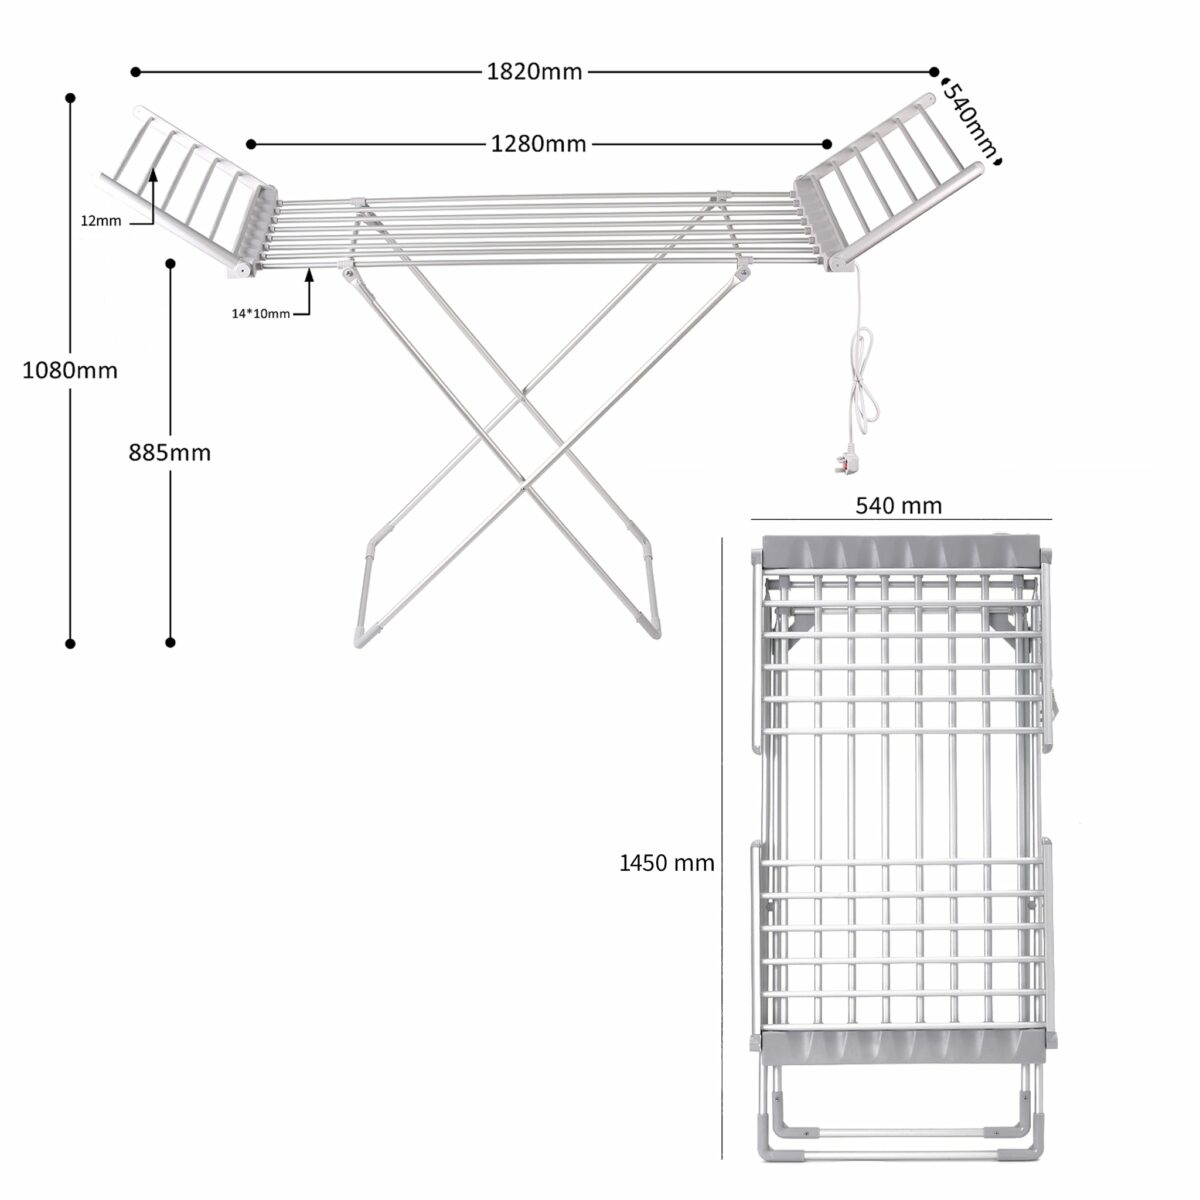 Heated Clothes Airer Drying Rack Electric 15m - ABIS